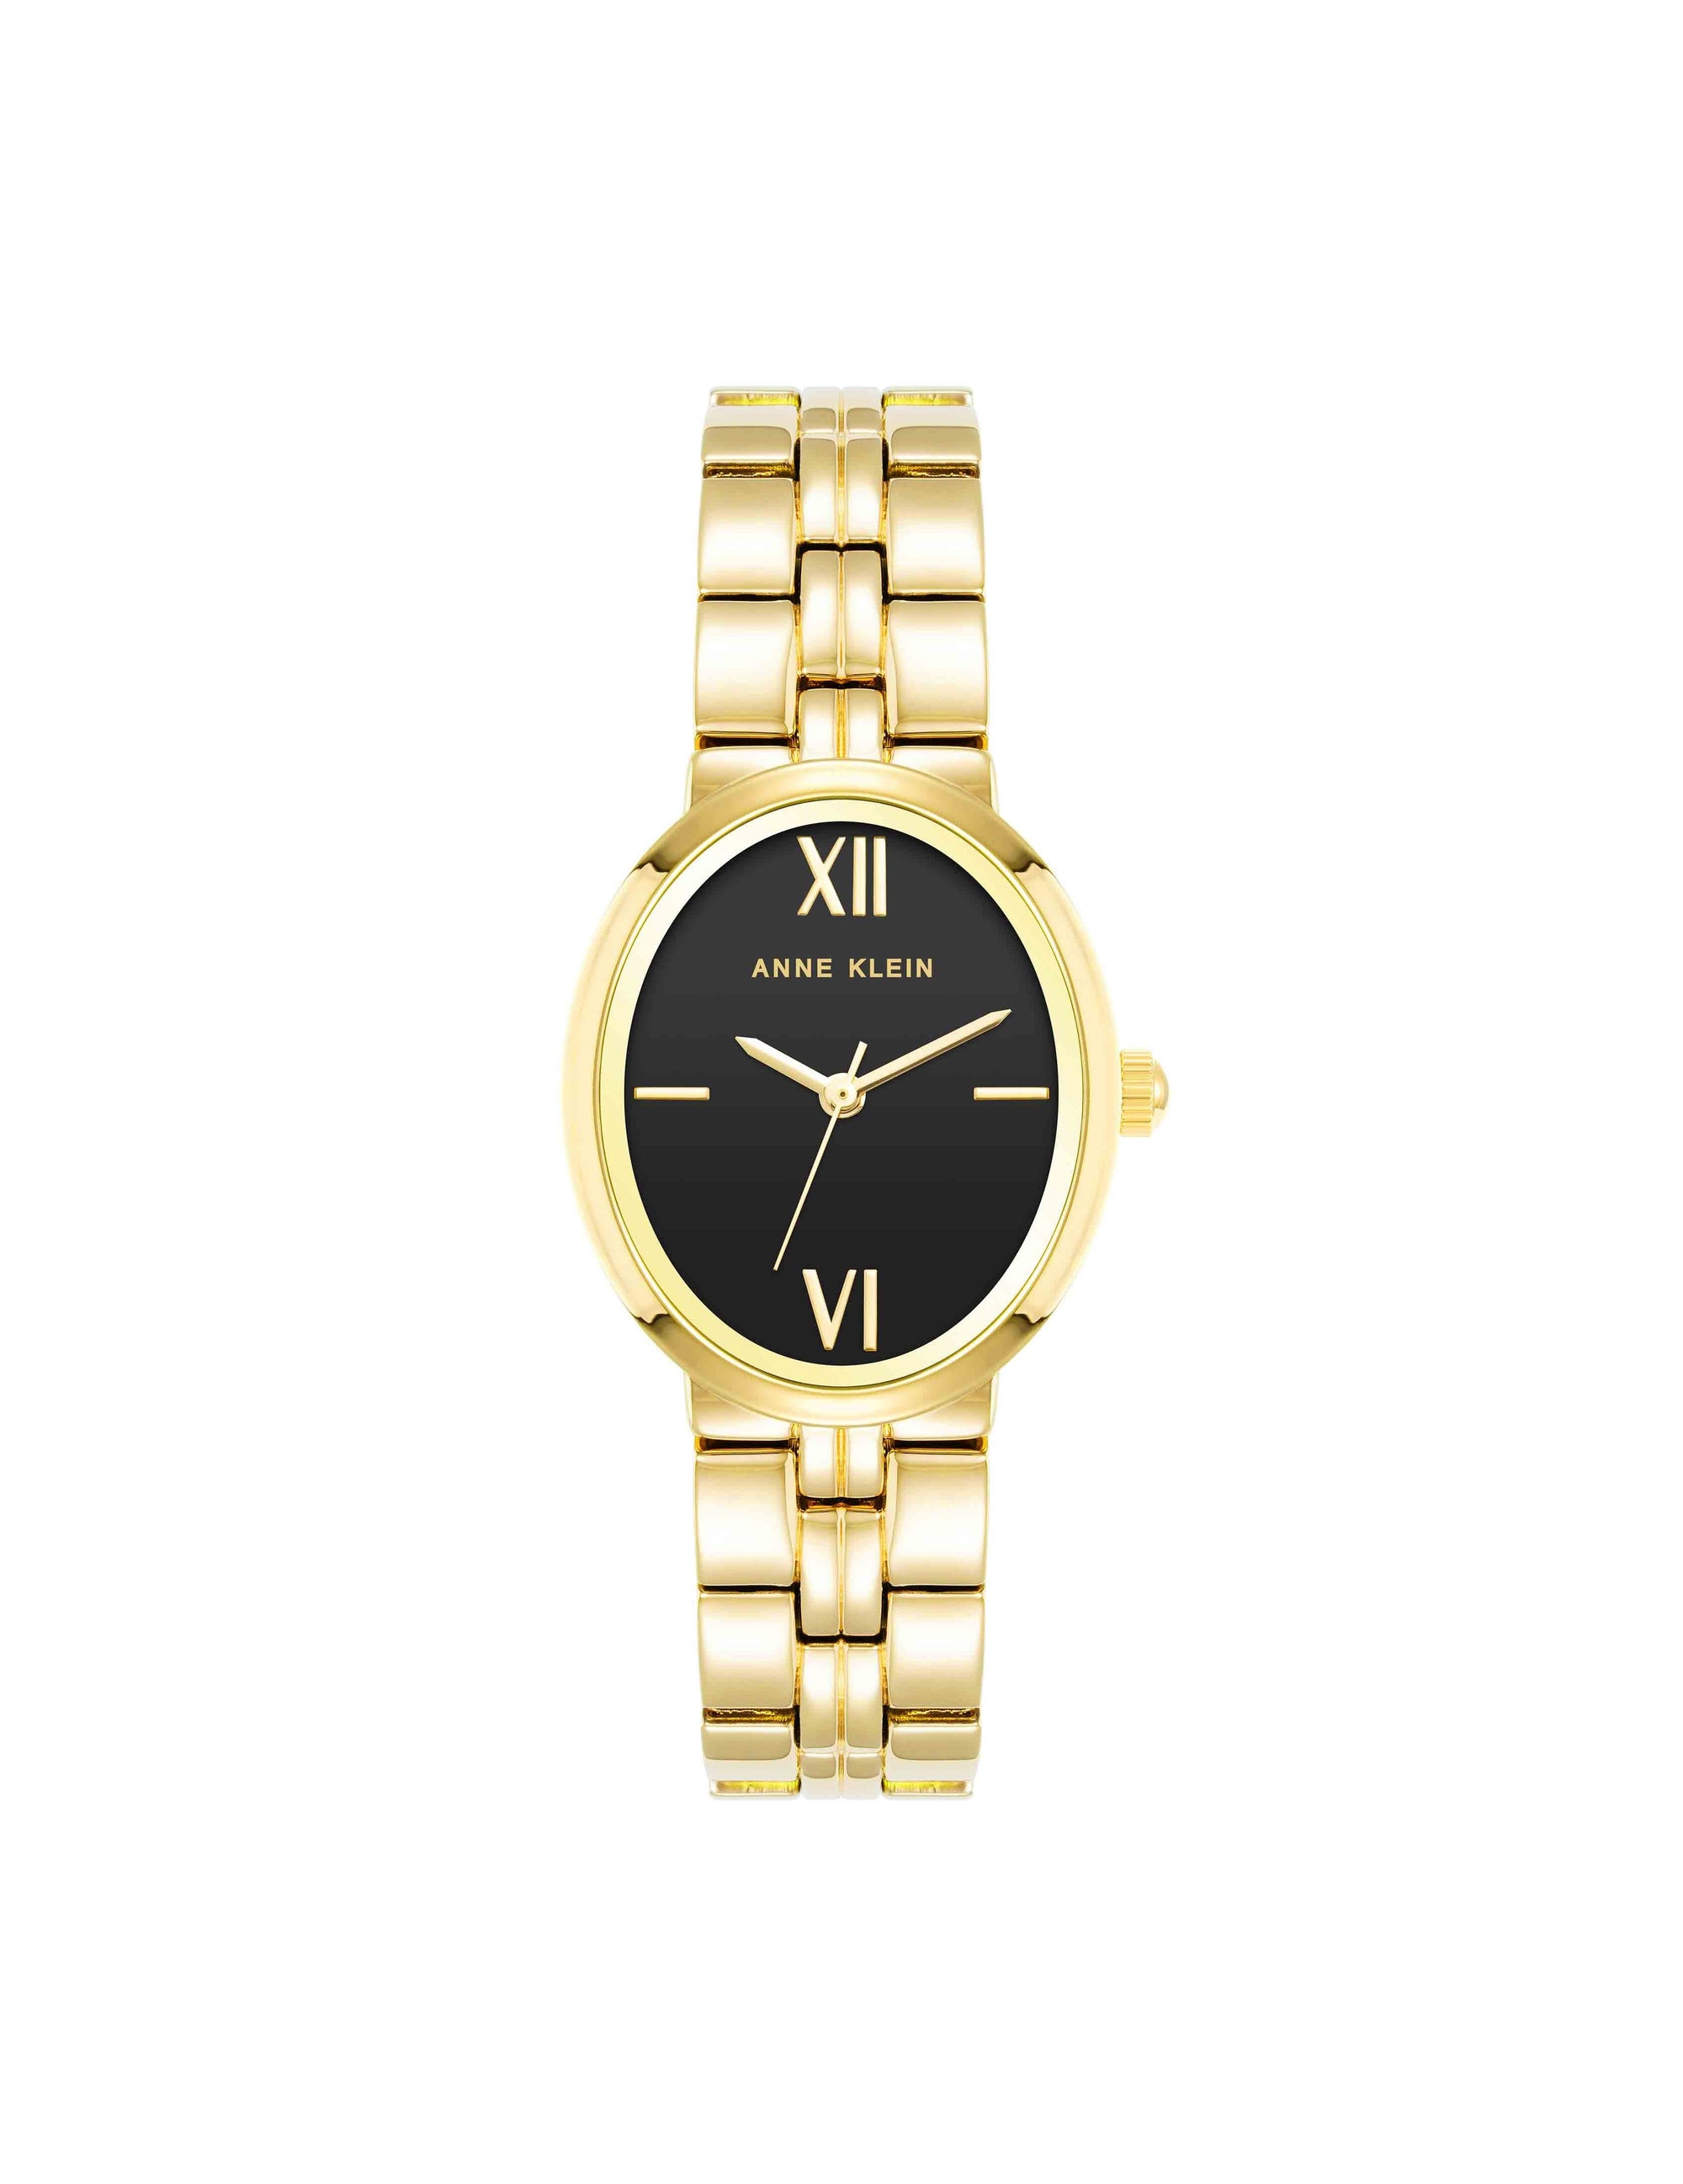 Ladies Fashion Watch New Simple Casual Women's Analog WristWatch Bracelet  Gift Montre Femme at Rs 512 | Delhi| ID: 2849081261062